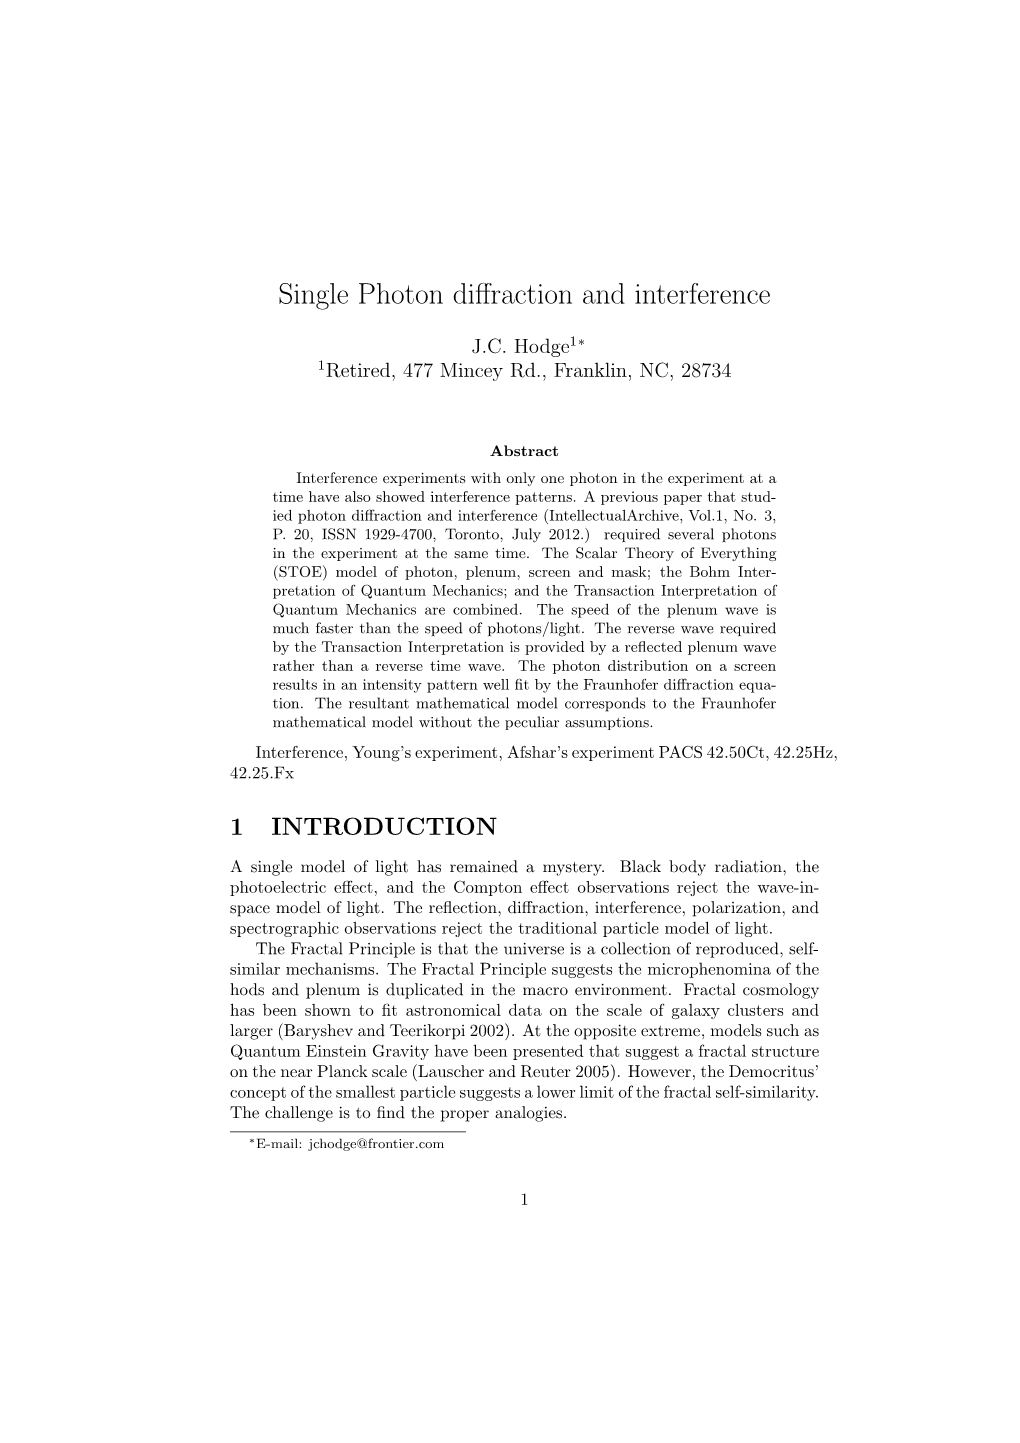 Single Photon Diffraction and Interference